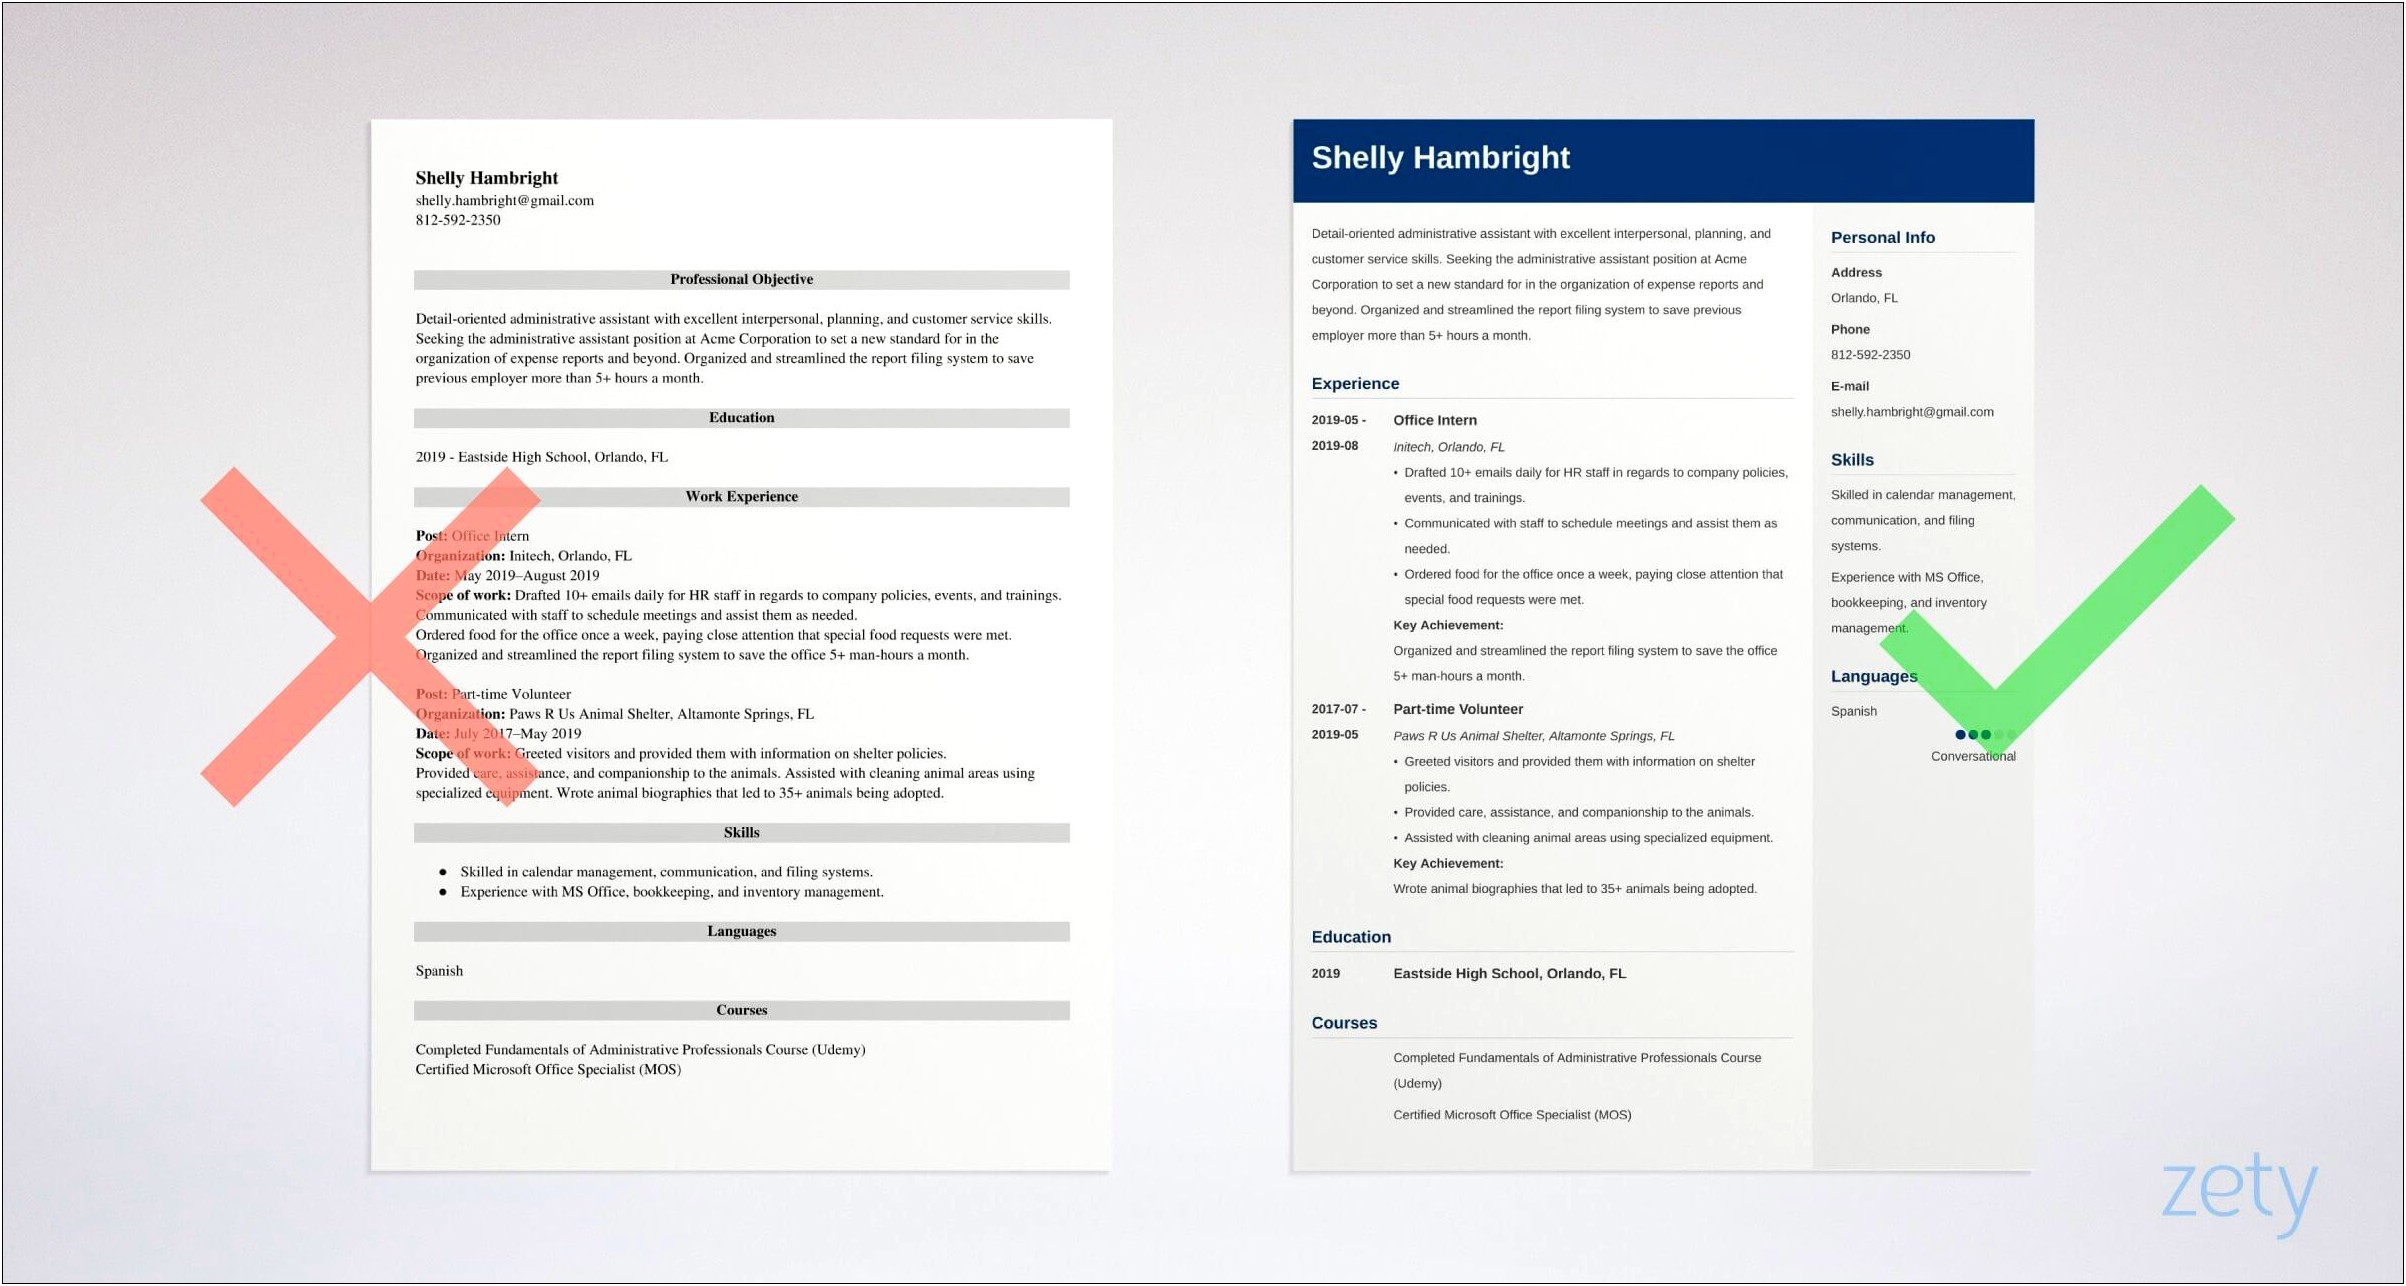 Examples Of Objectives On Resumes For Office Assistant